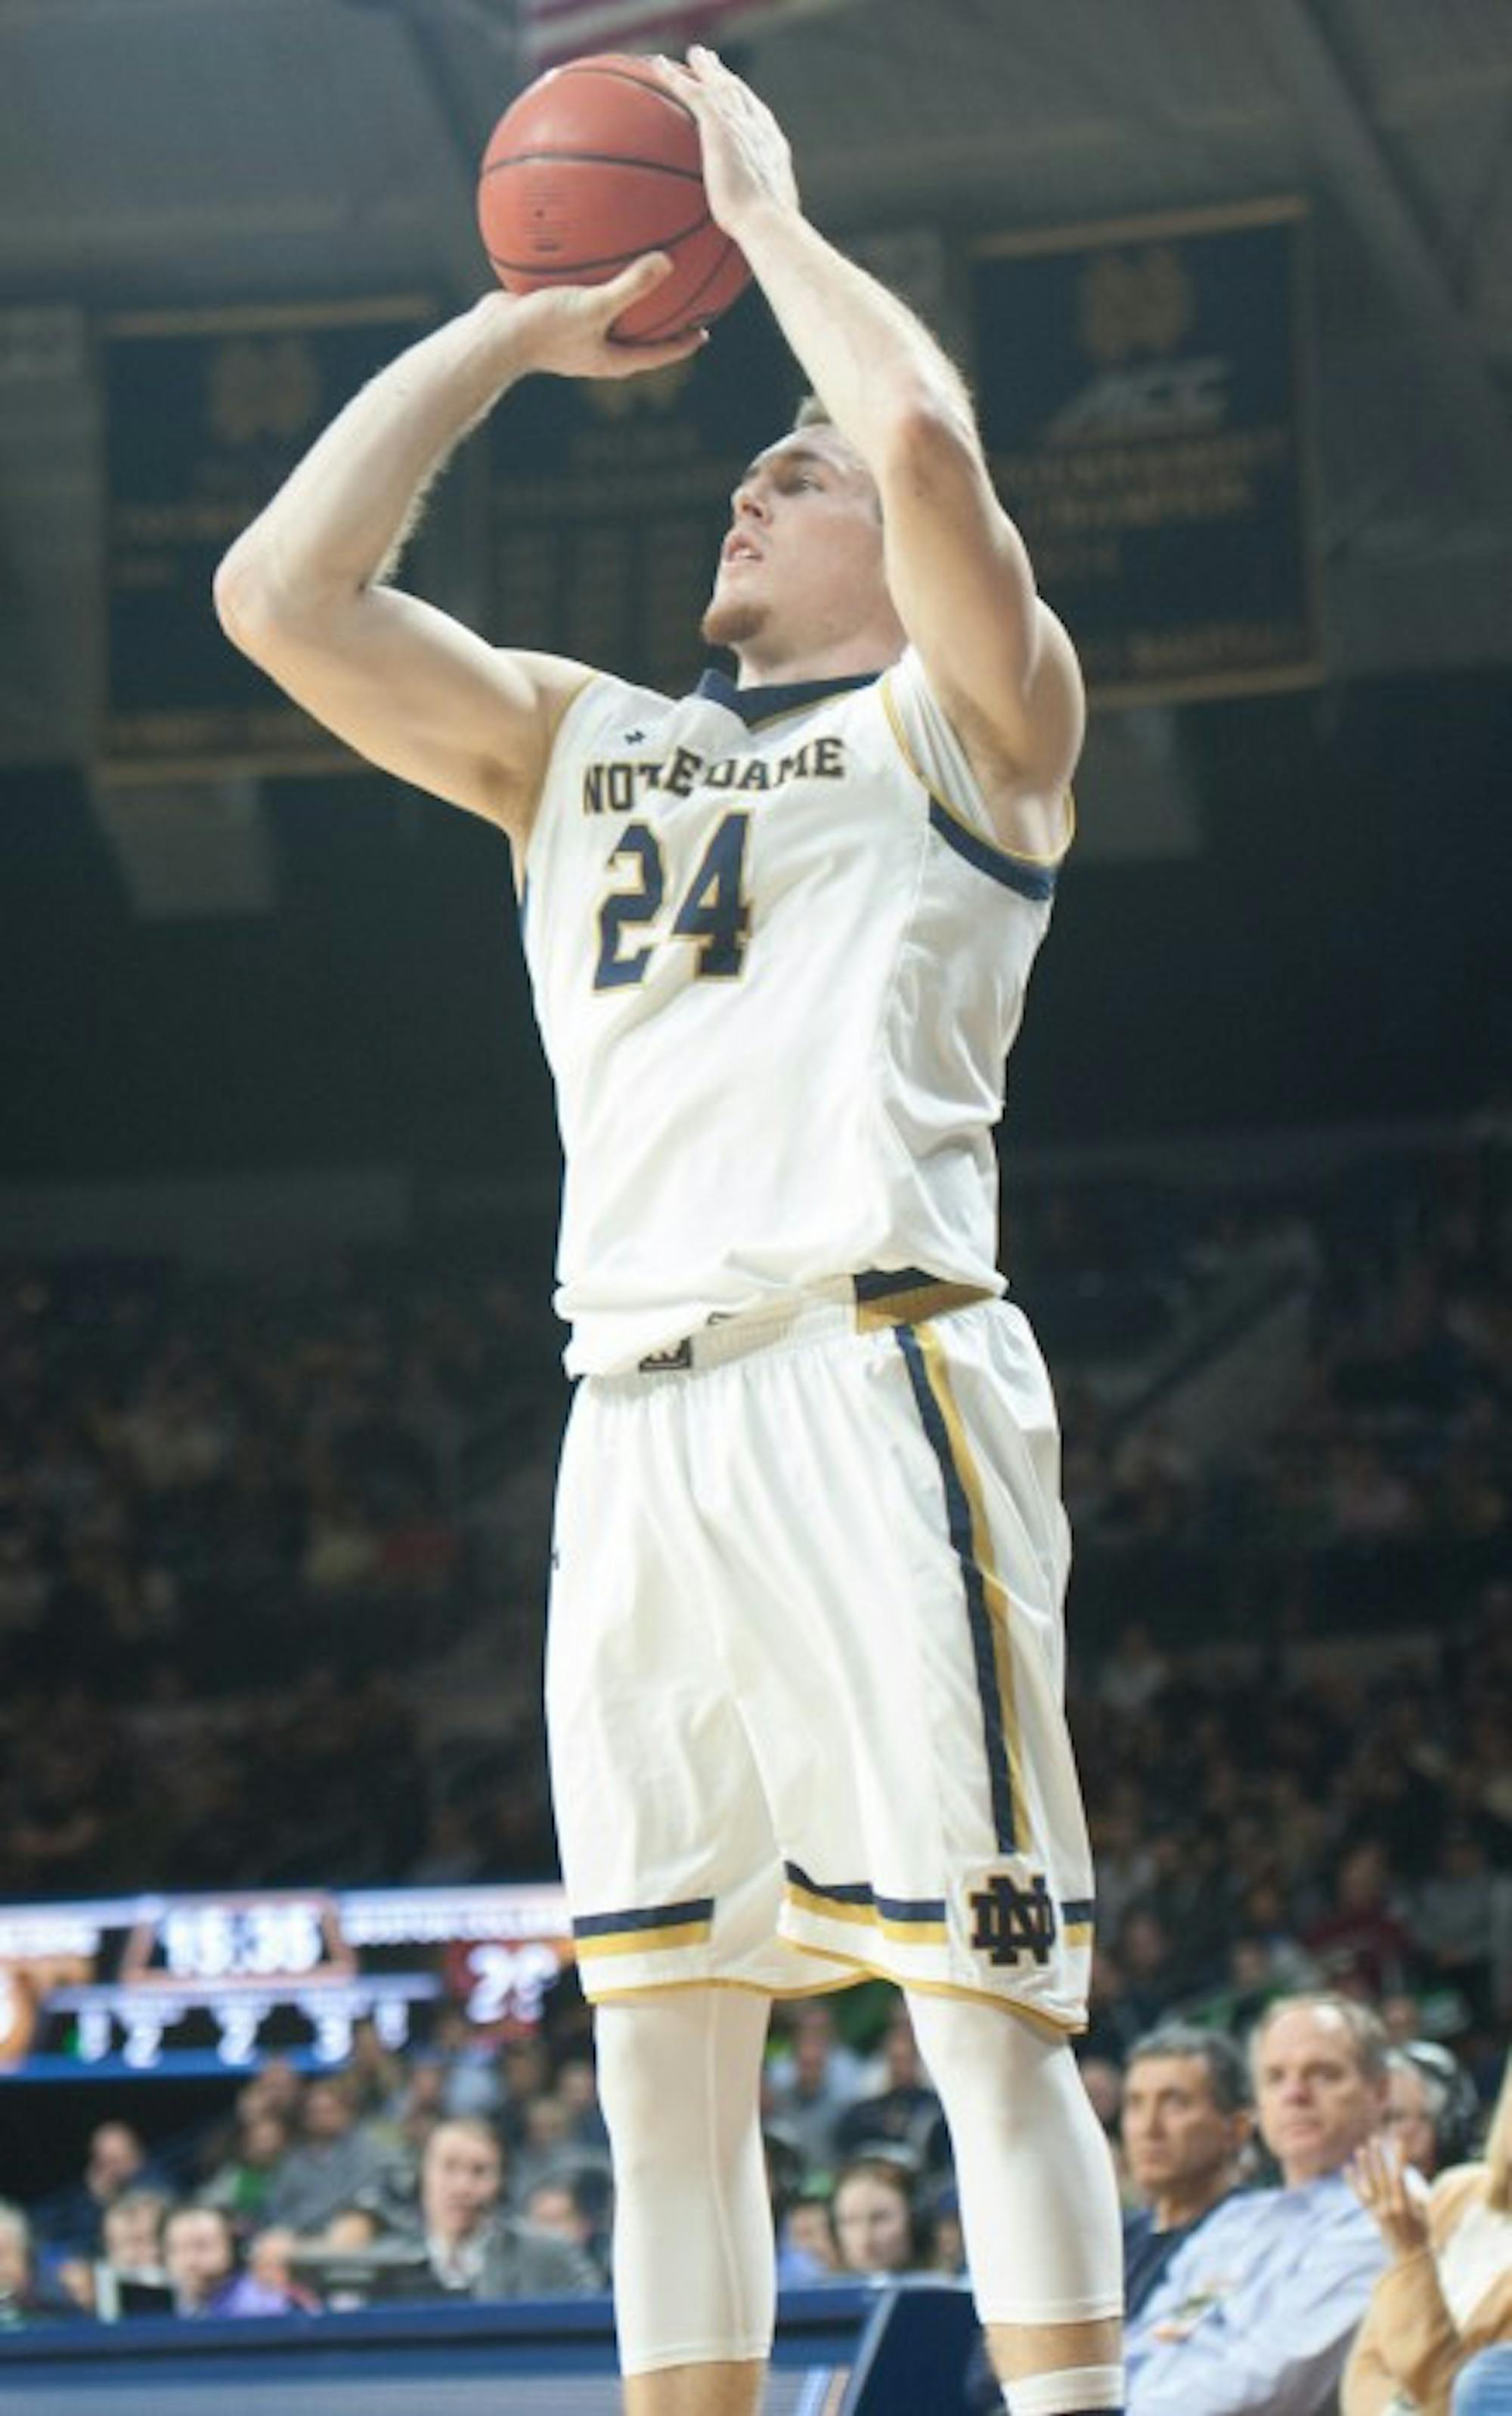 Notre Dame senior Pat Connaughton sets up to shoot  during a 71-63 win over Boston College on Feb. 4 at Purcell Pavilion.